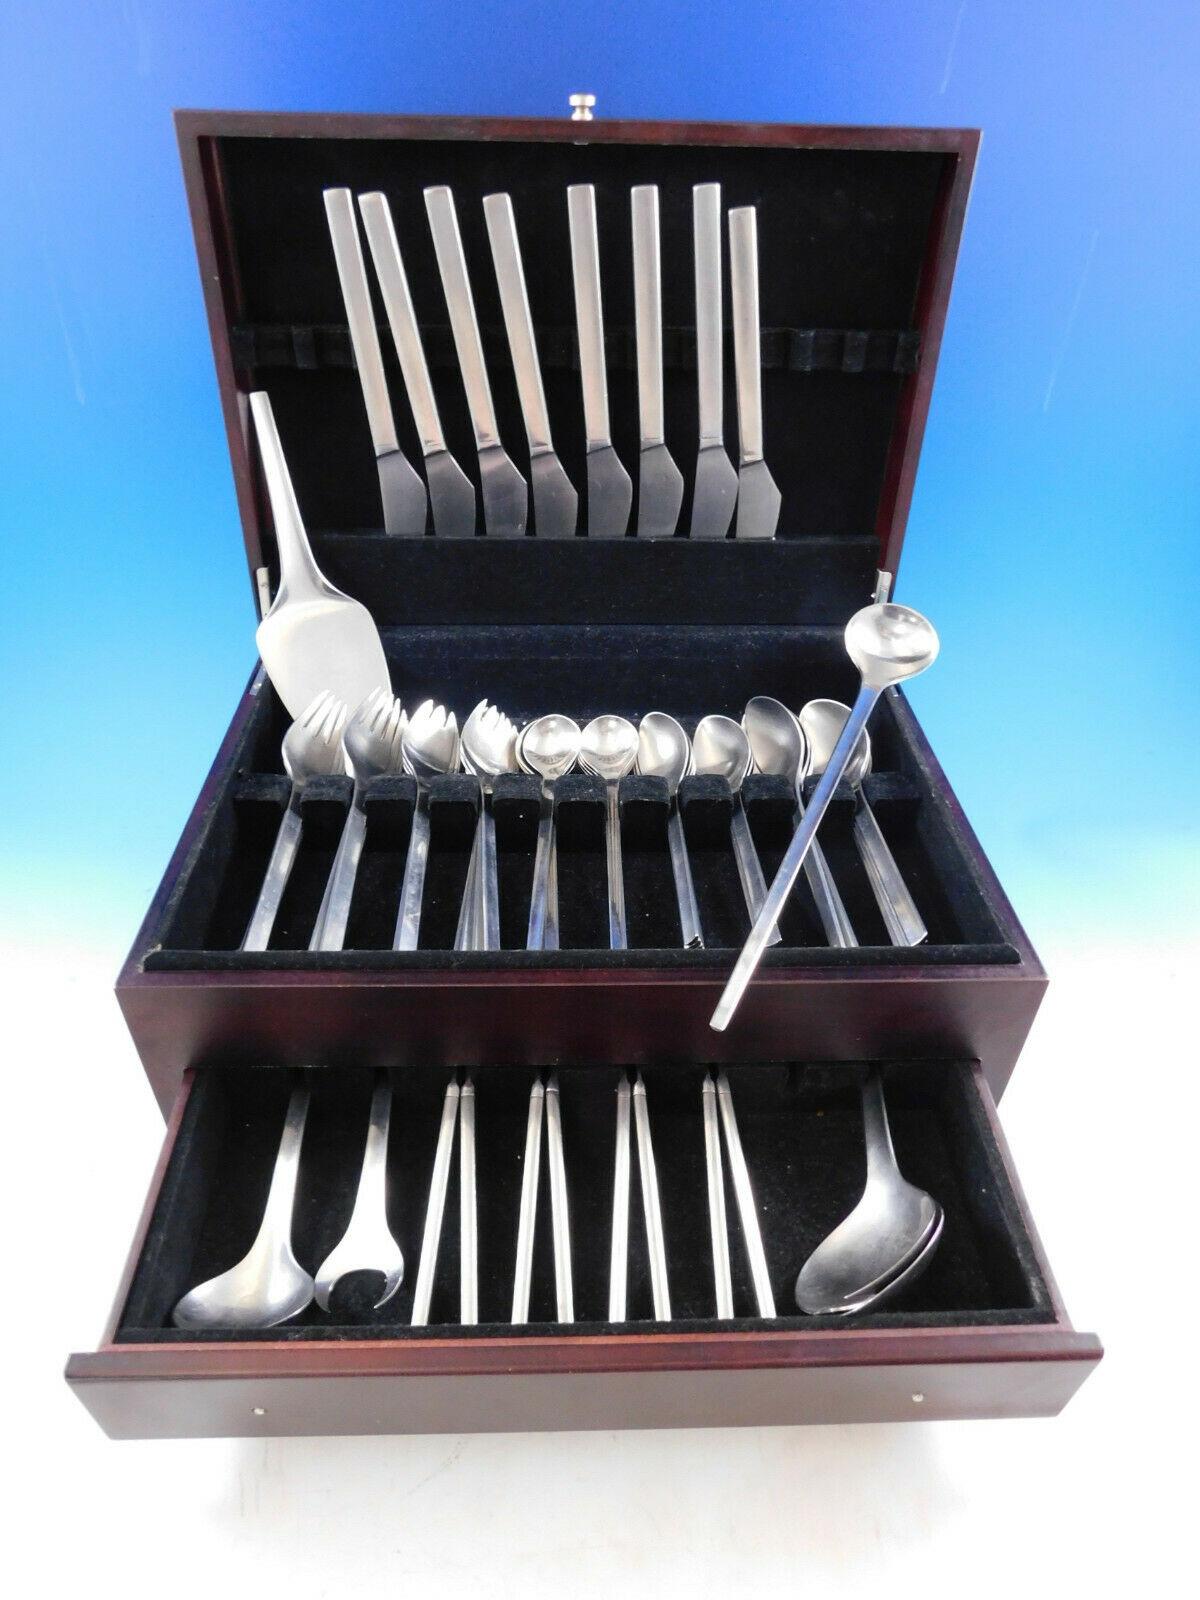 Vintage Tanaquil stainless steel flatware set by Georg Jensen.
This 62 piece set includes:

8 dinner knives, 8 7/8